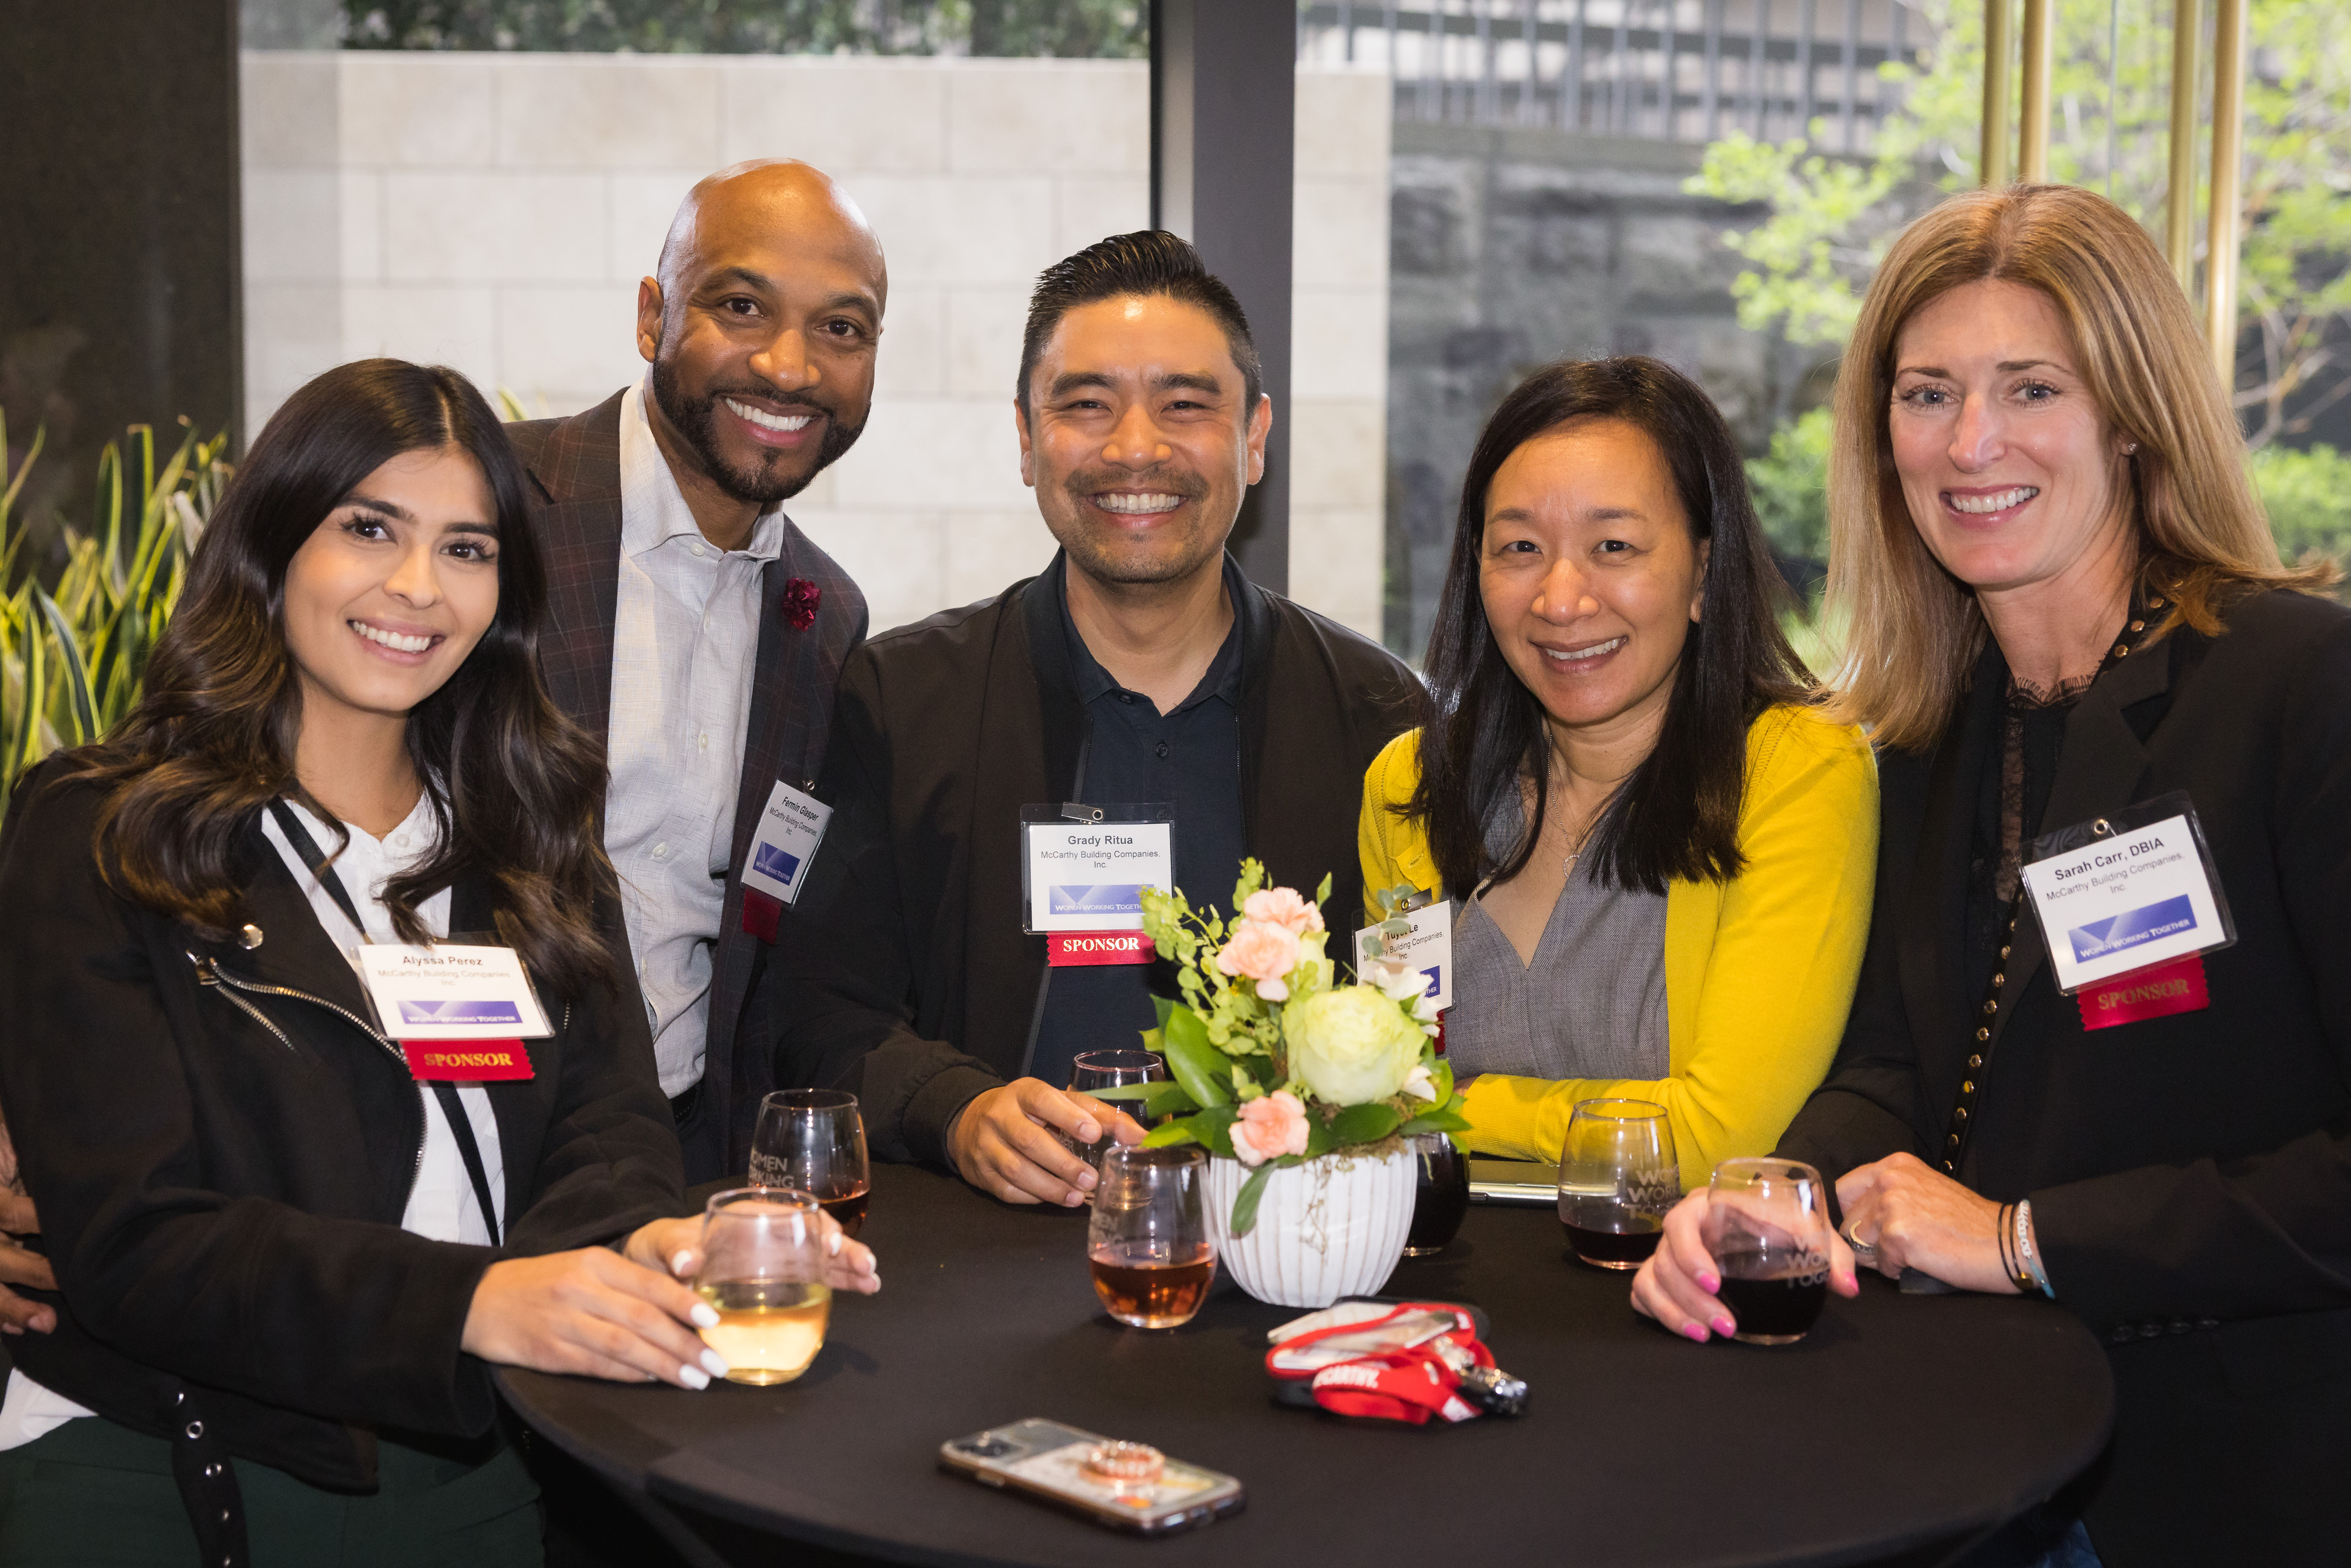 L-R: Alyssa Perez, Fermin Glasper, Grady Ritua, Tuyet Le, and Sarah Carr from McCarthy Building Companies, one of the 21 AEC industry sponsors that made the WWT Networking Event possible.